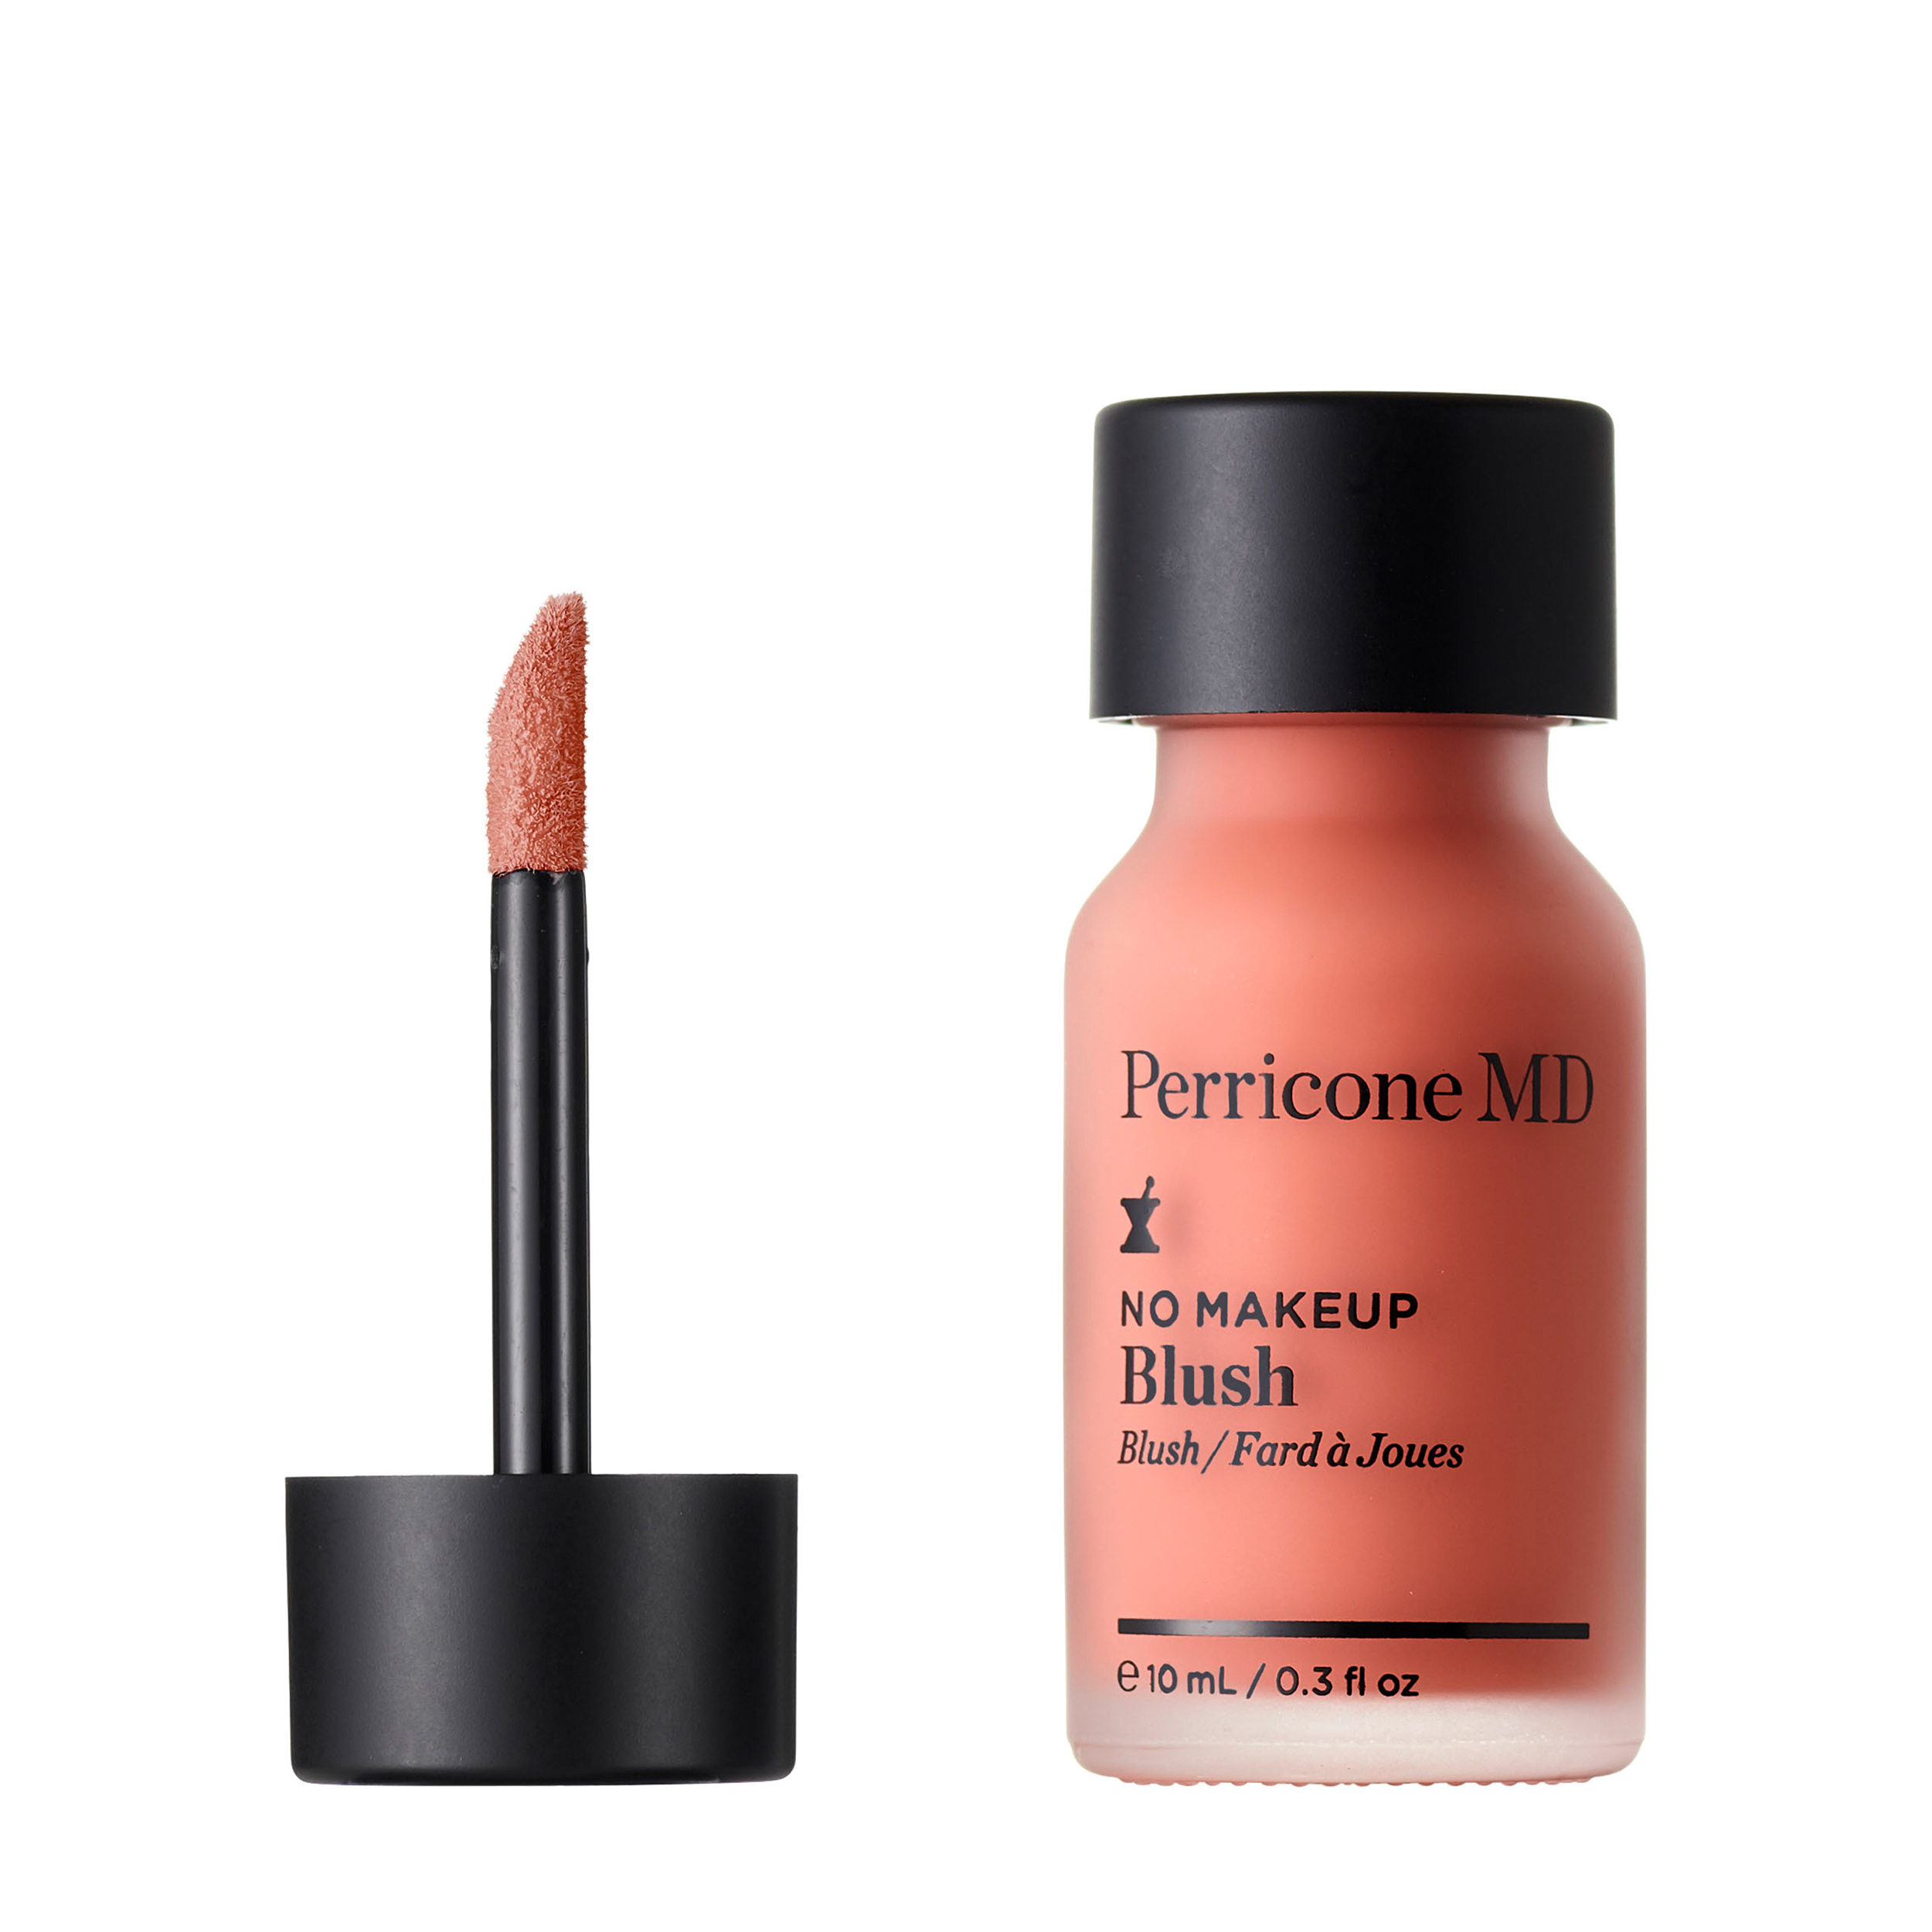 Perricone MD Perricone MD Гелевые румяна для лица No Make Up Blush 10 мл